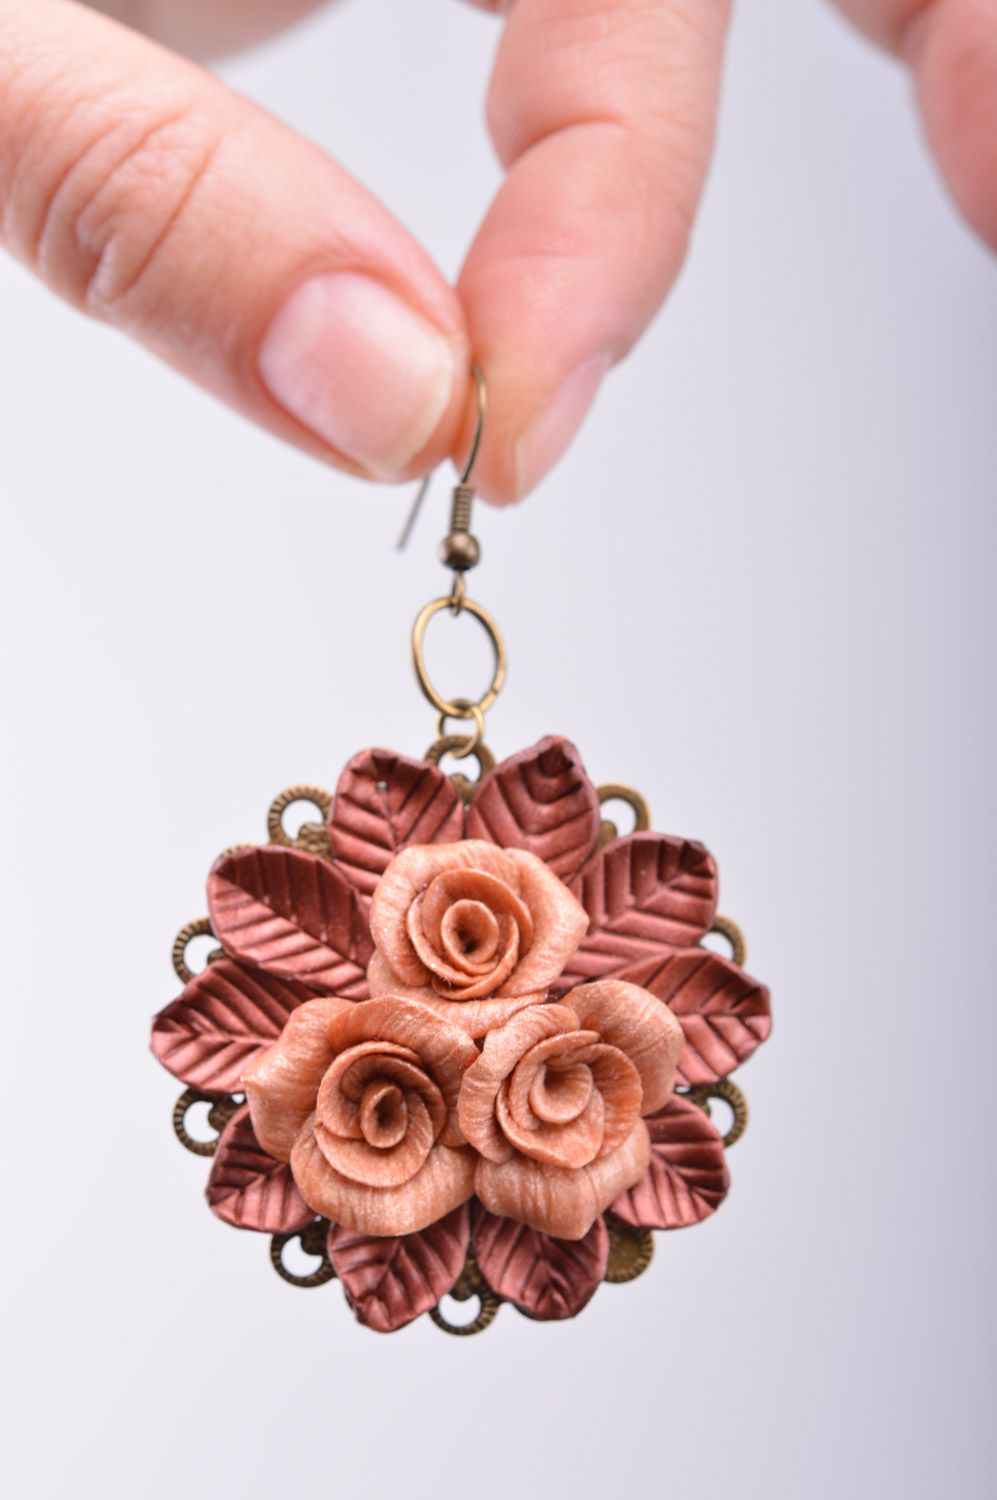 Handmade polymer clay round earrings with roses in vintage style photo 2